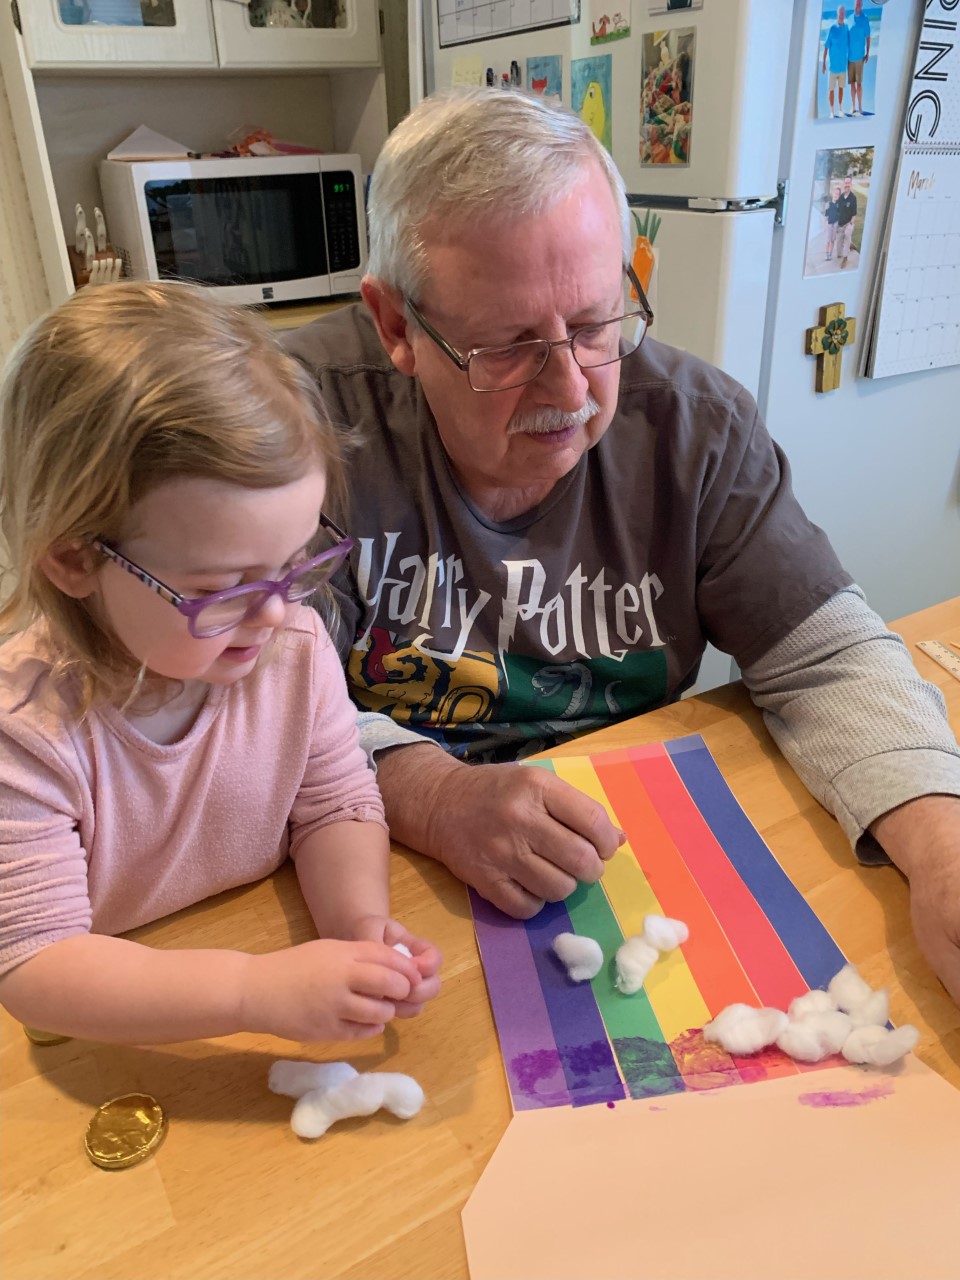 a child and her grandfather building a leprechaun trap